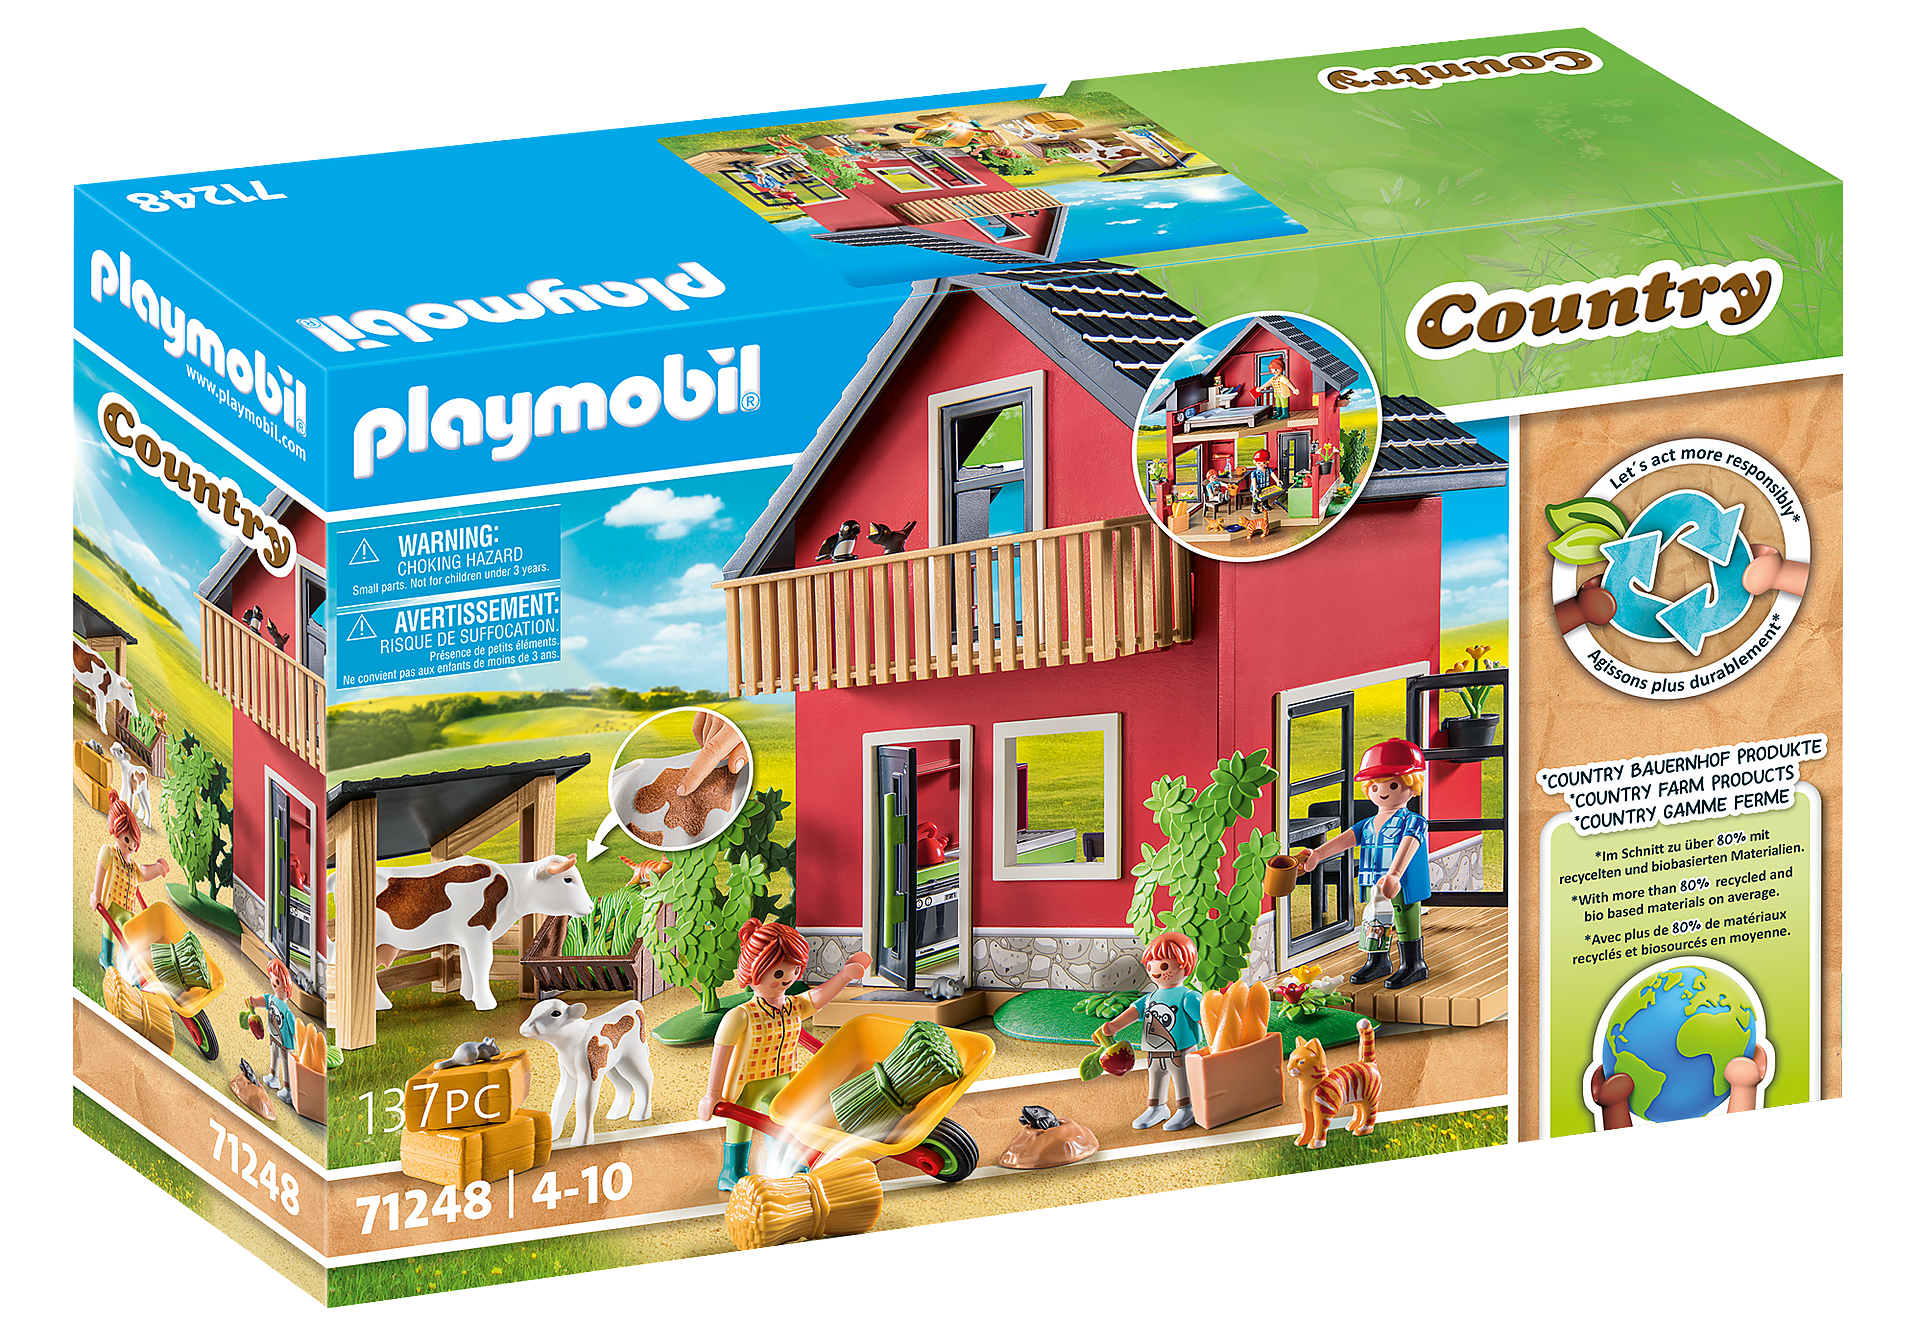 Playmobil Country - Mobile Farrier 70518 (For Kids 4 to 10 Years